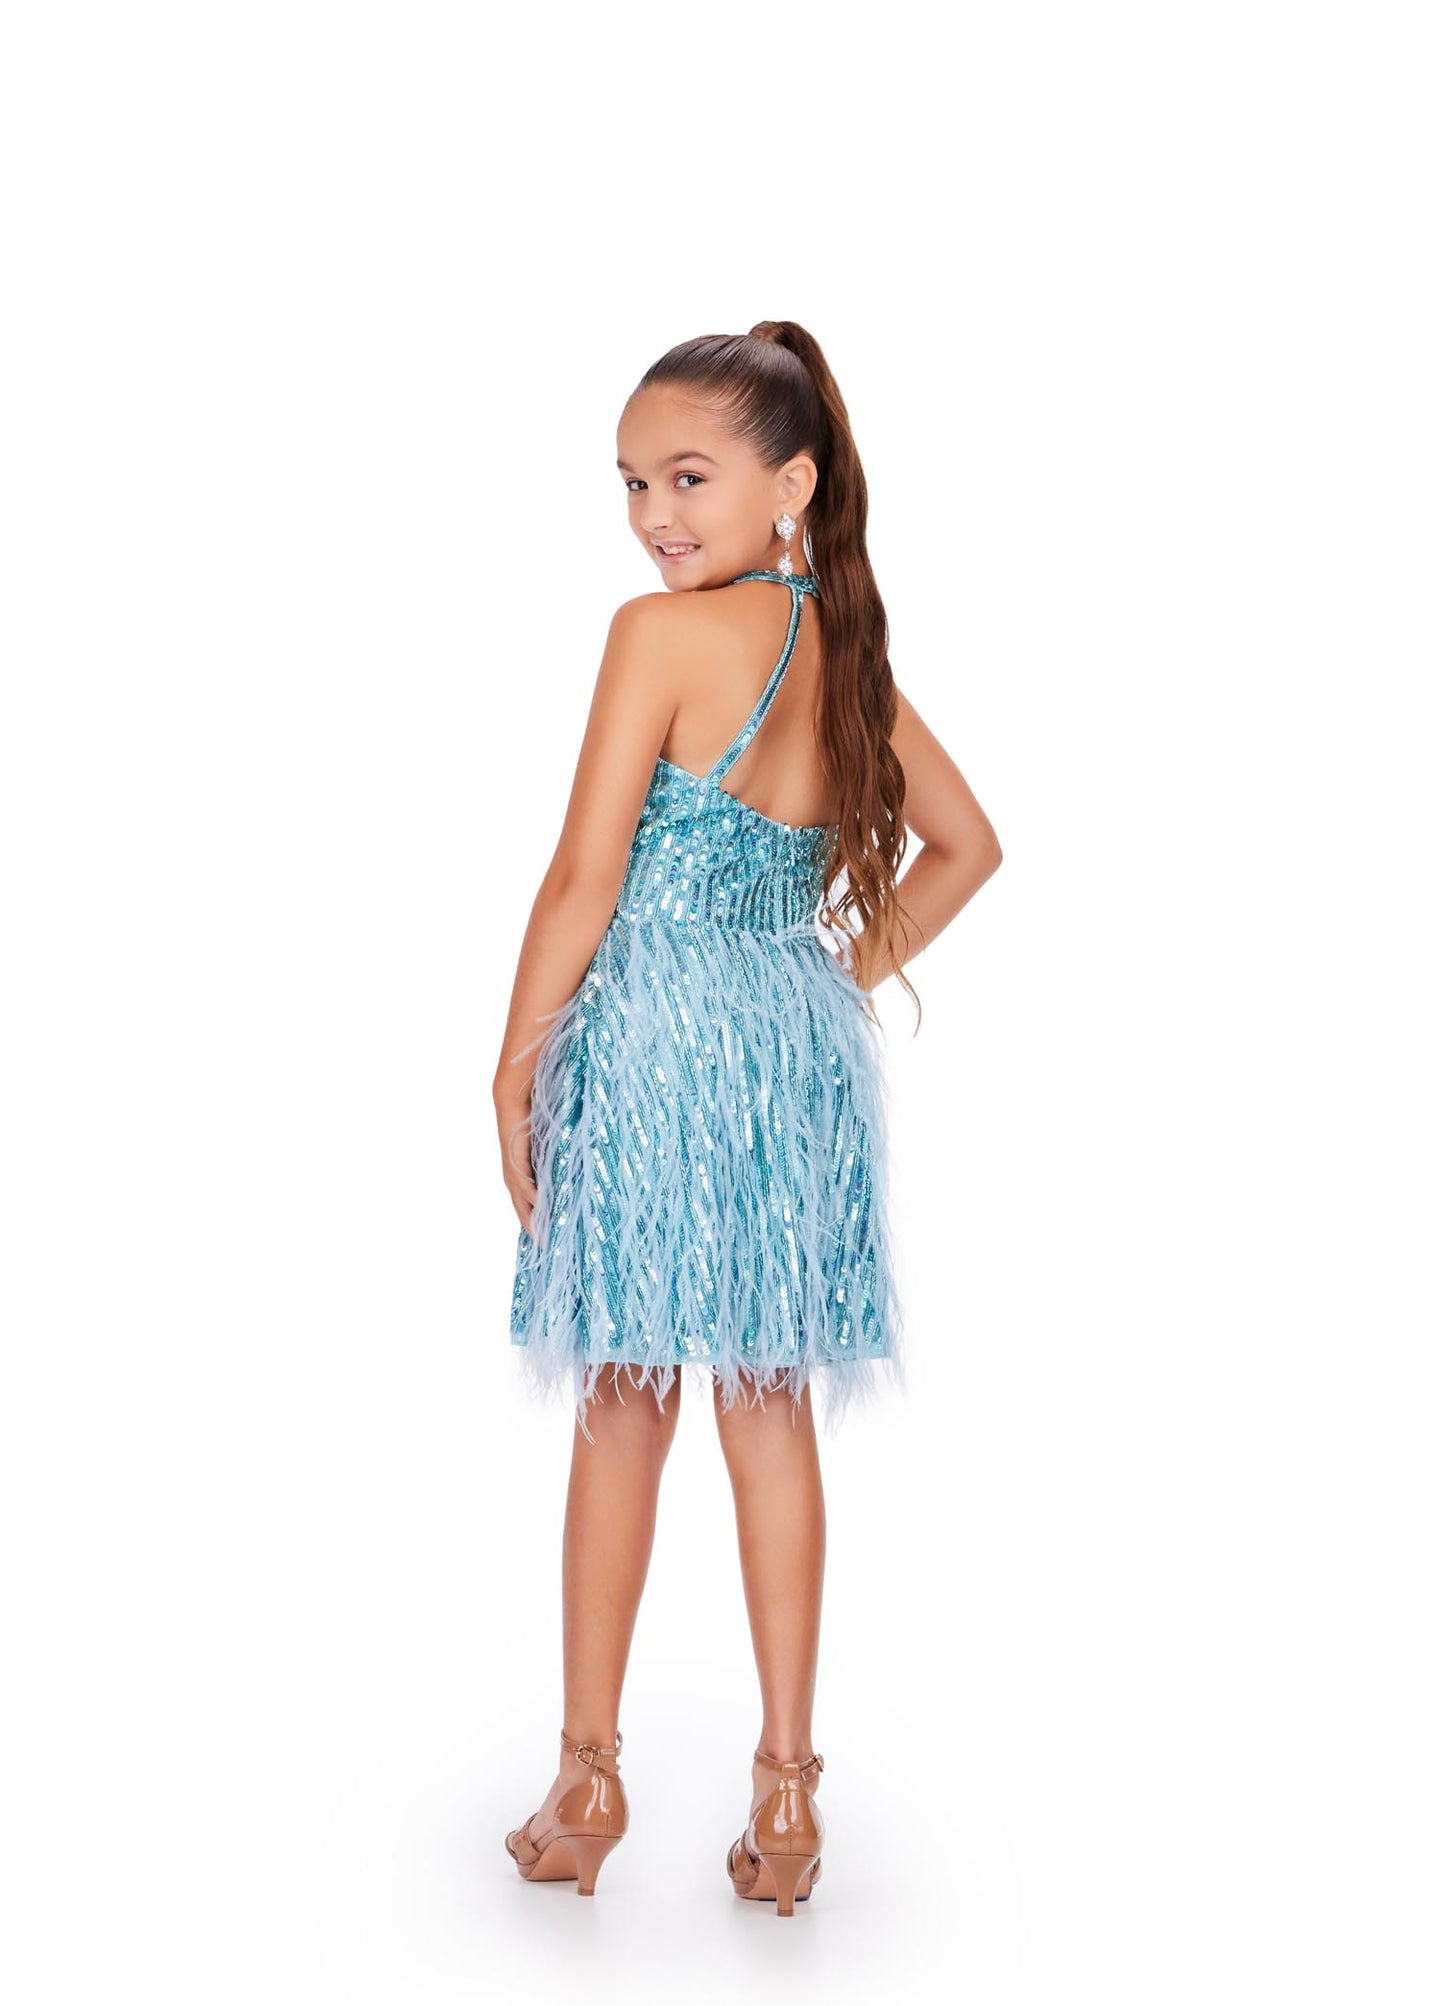 Ashley Lauren Kids 8196 Fully Beaded Girls Cocktail Dress Halter Top With Feather A-Line Skirt